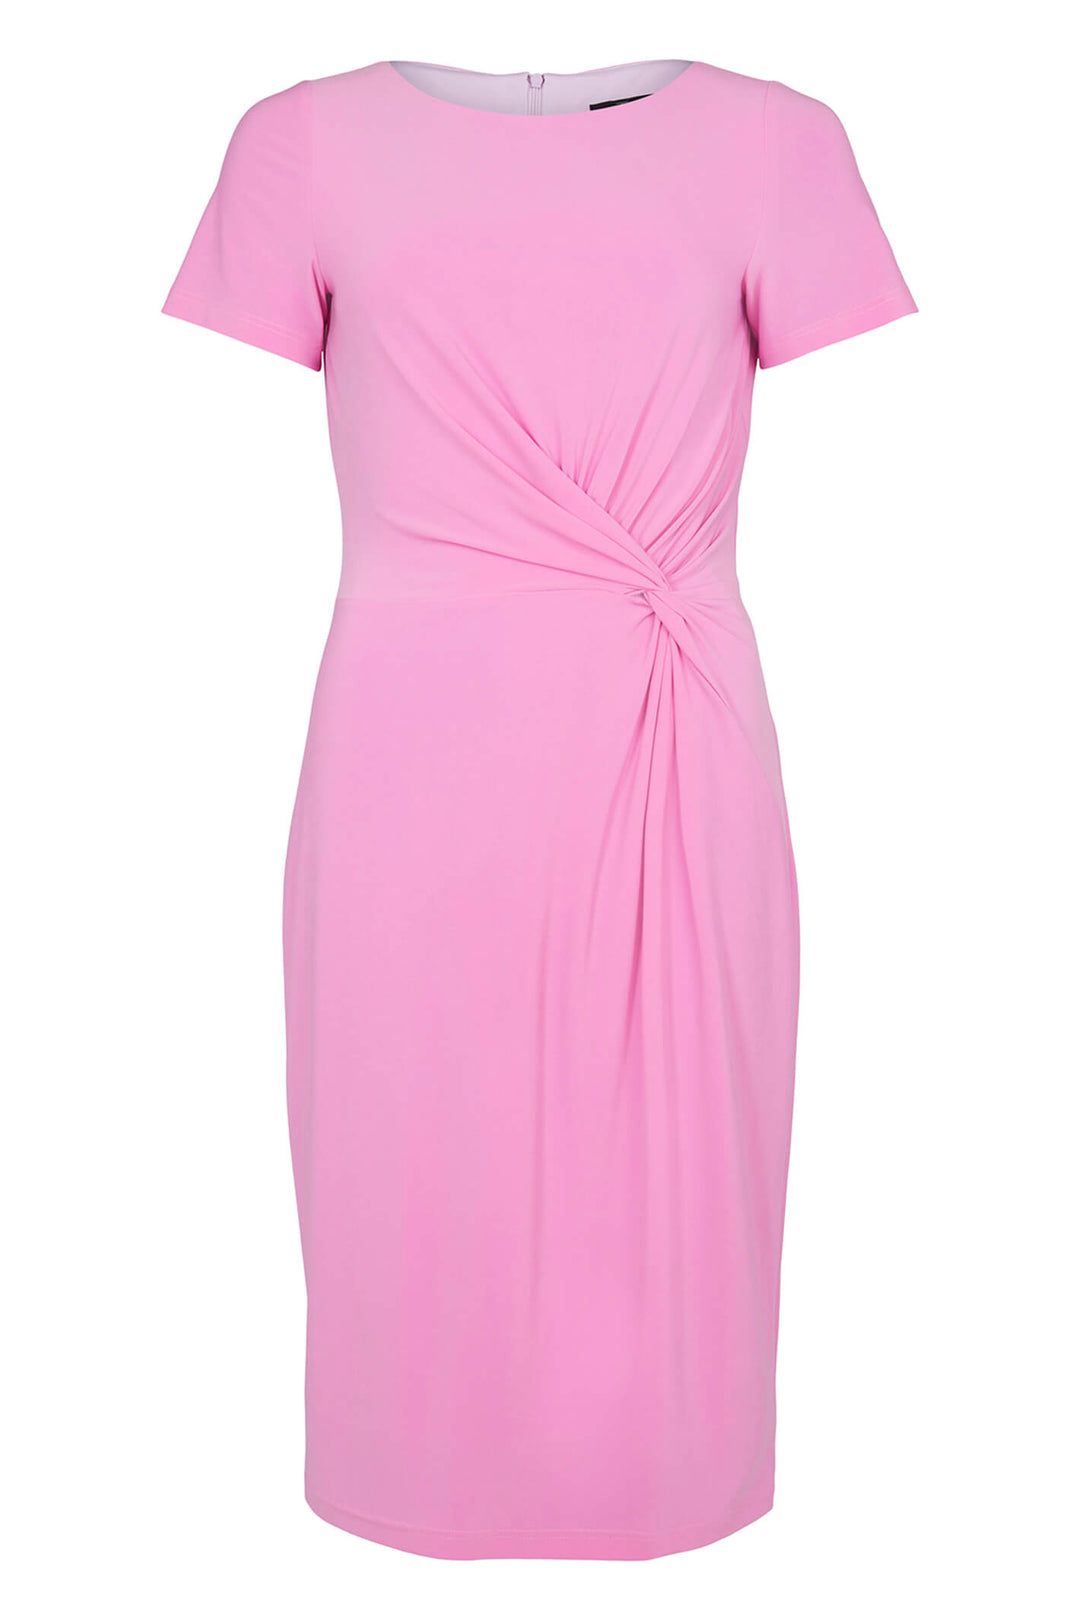 Tia 78409 Orchid Pink Ruched Dress